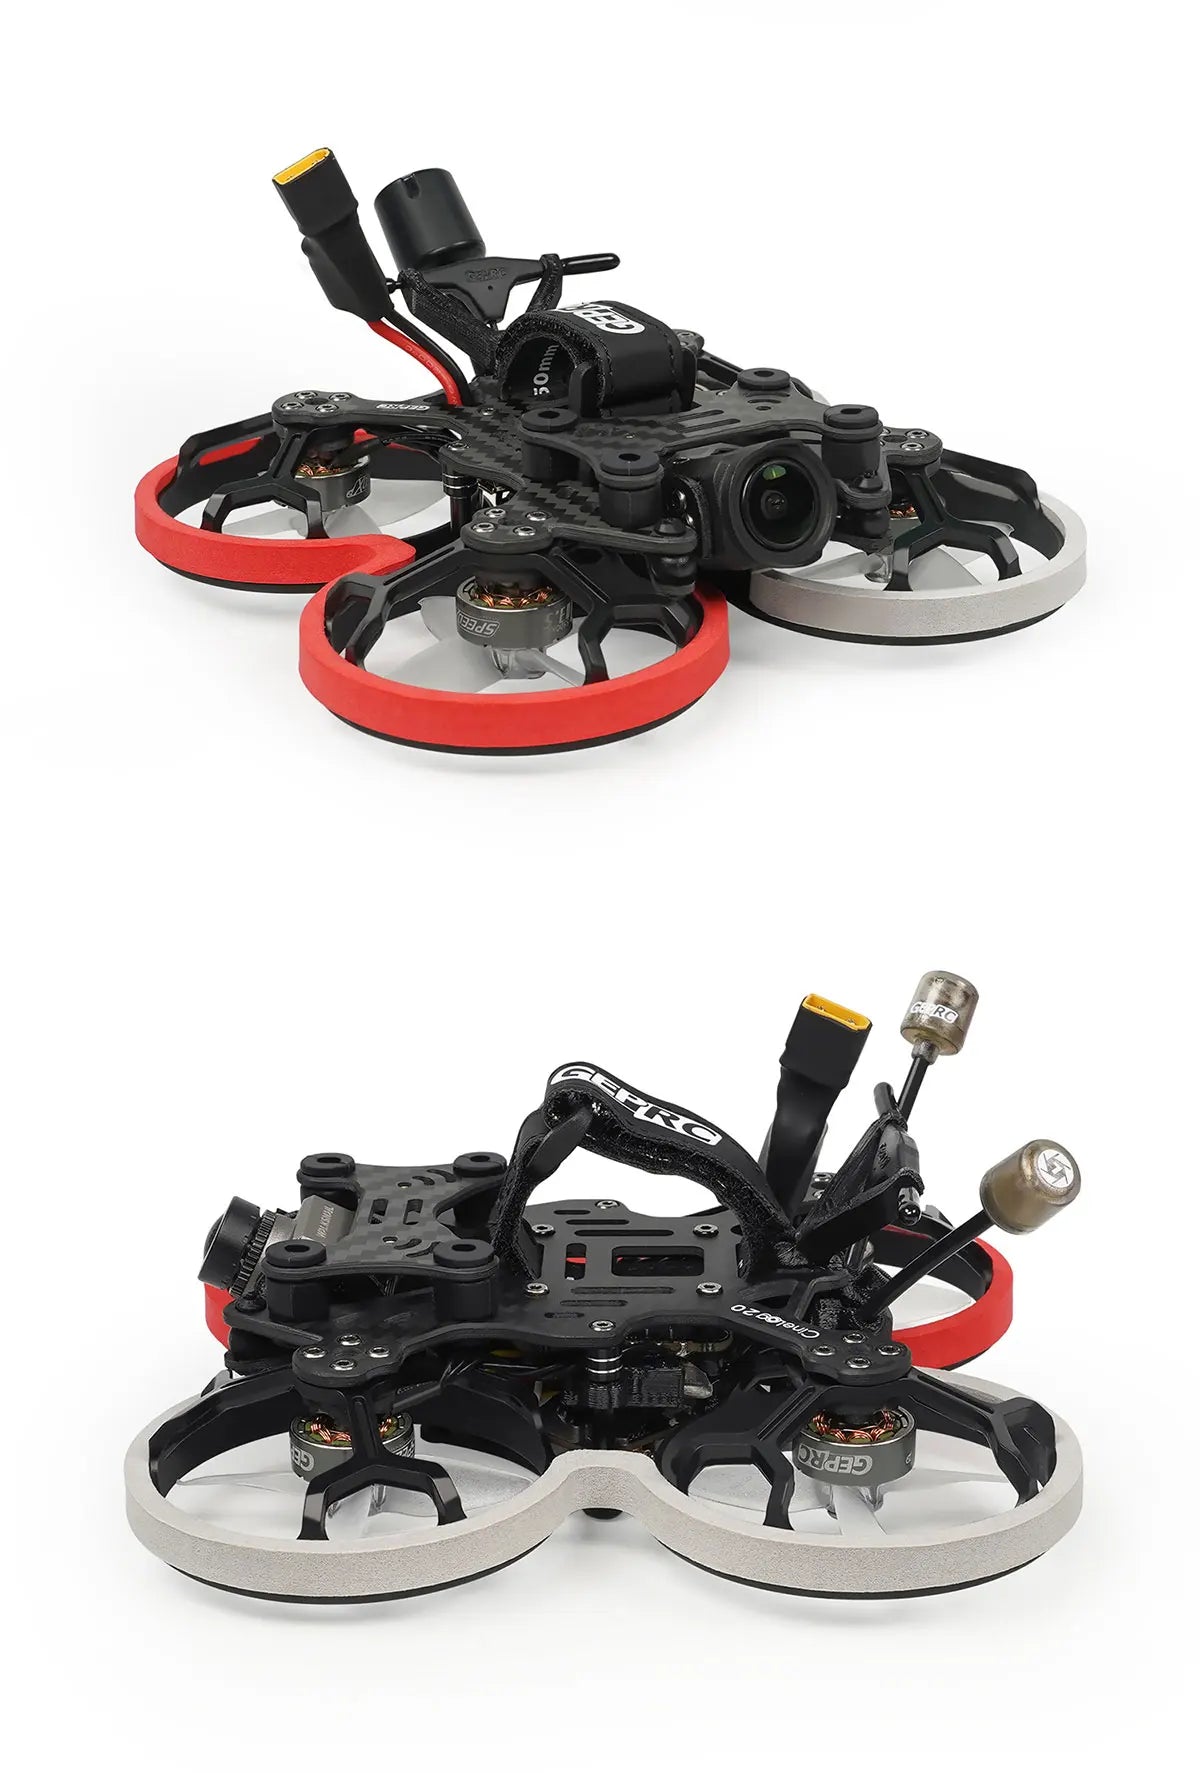 GEPRC Cinelog20 HD Wasp FPV Drone, the CineLog20 is a lightweight pusher design . the camera gimbal